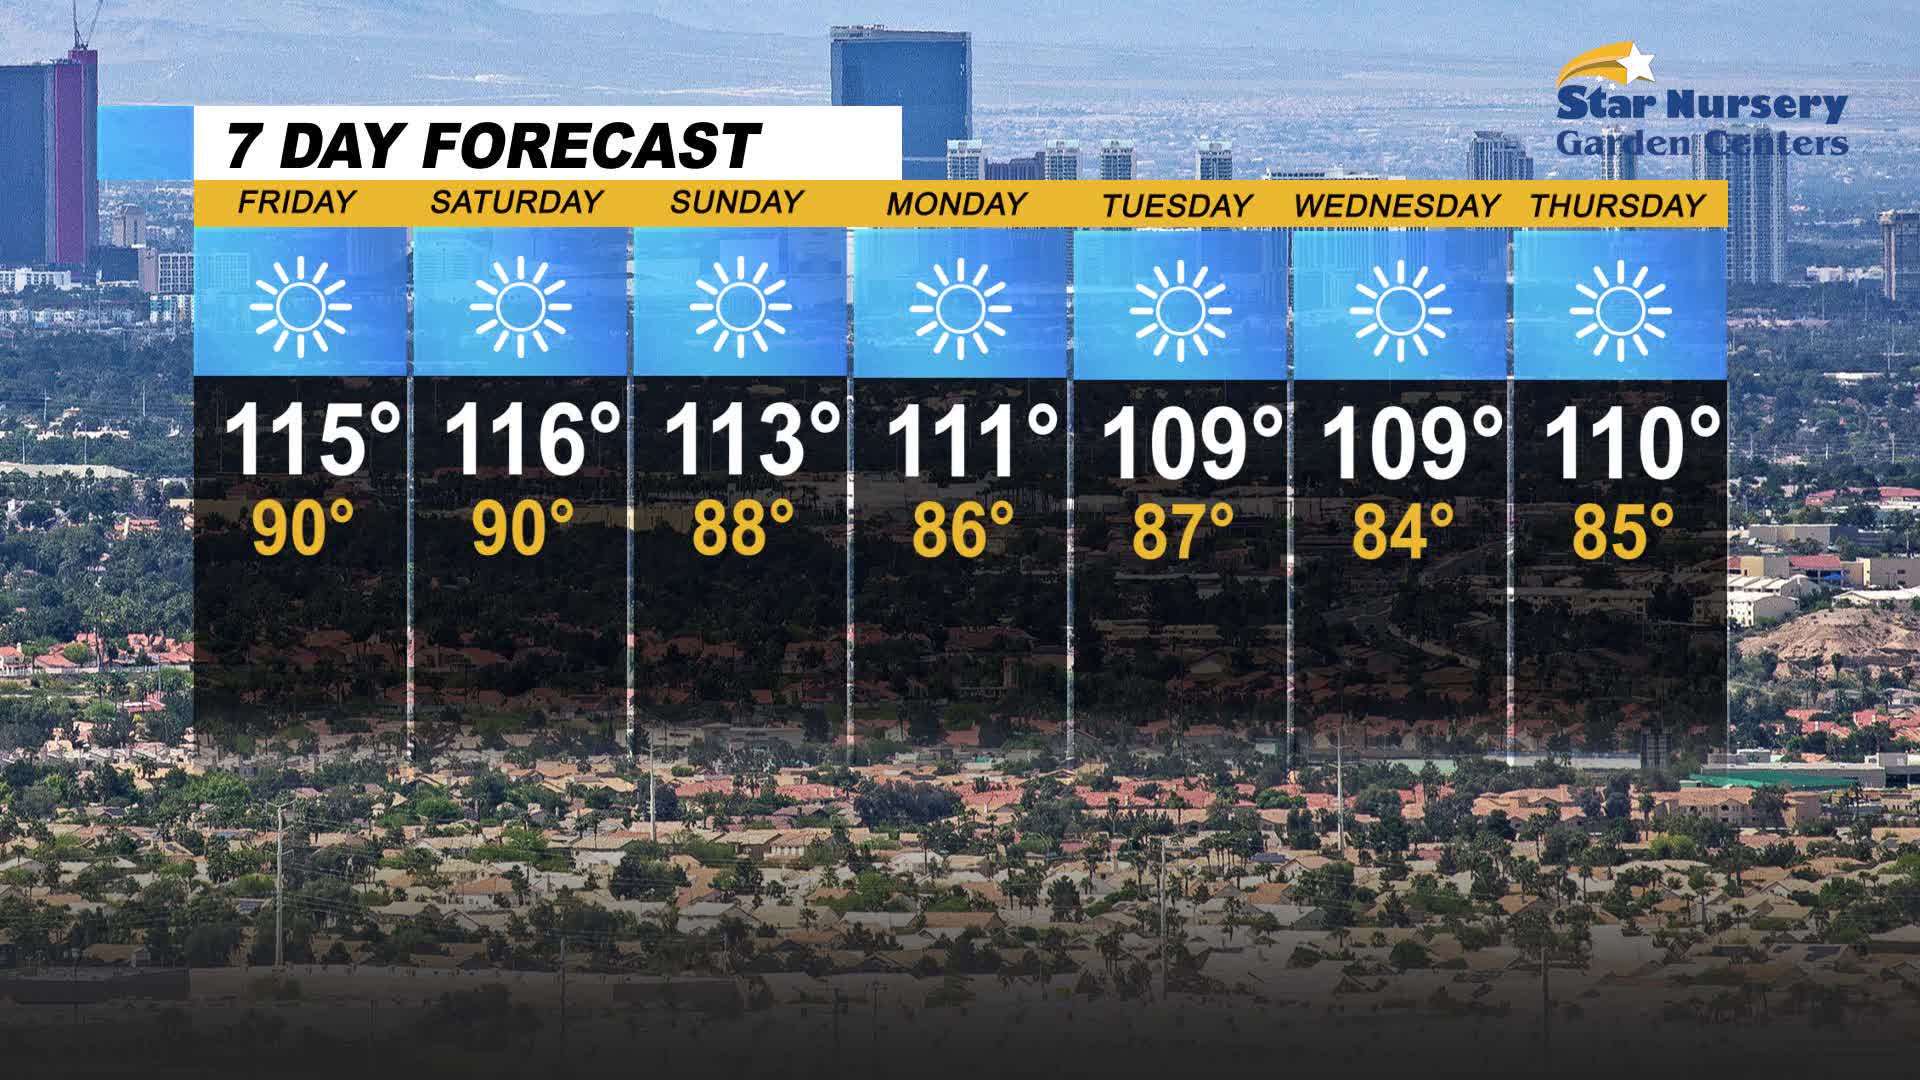 High of 115 degrees for Friday